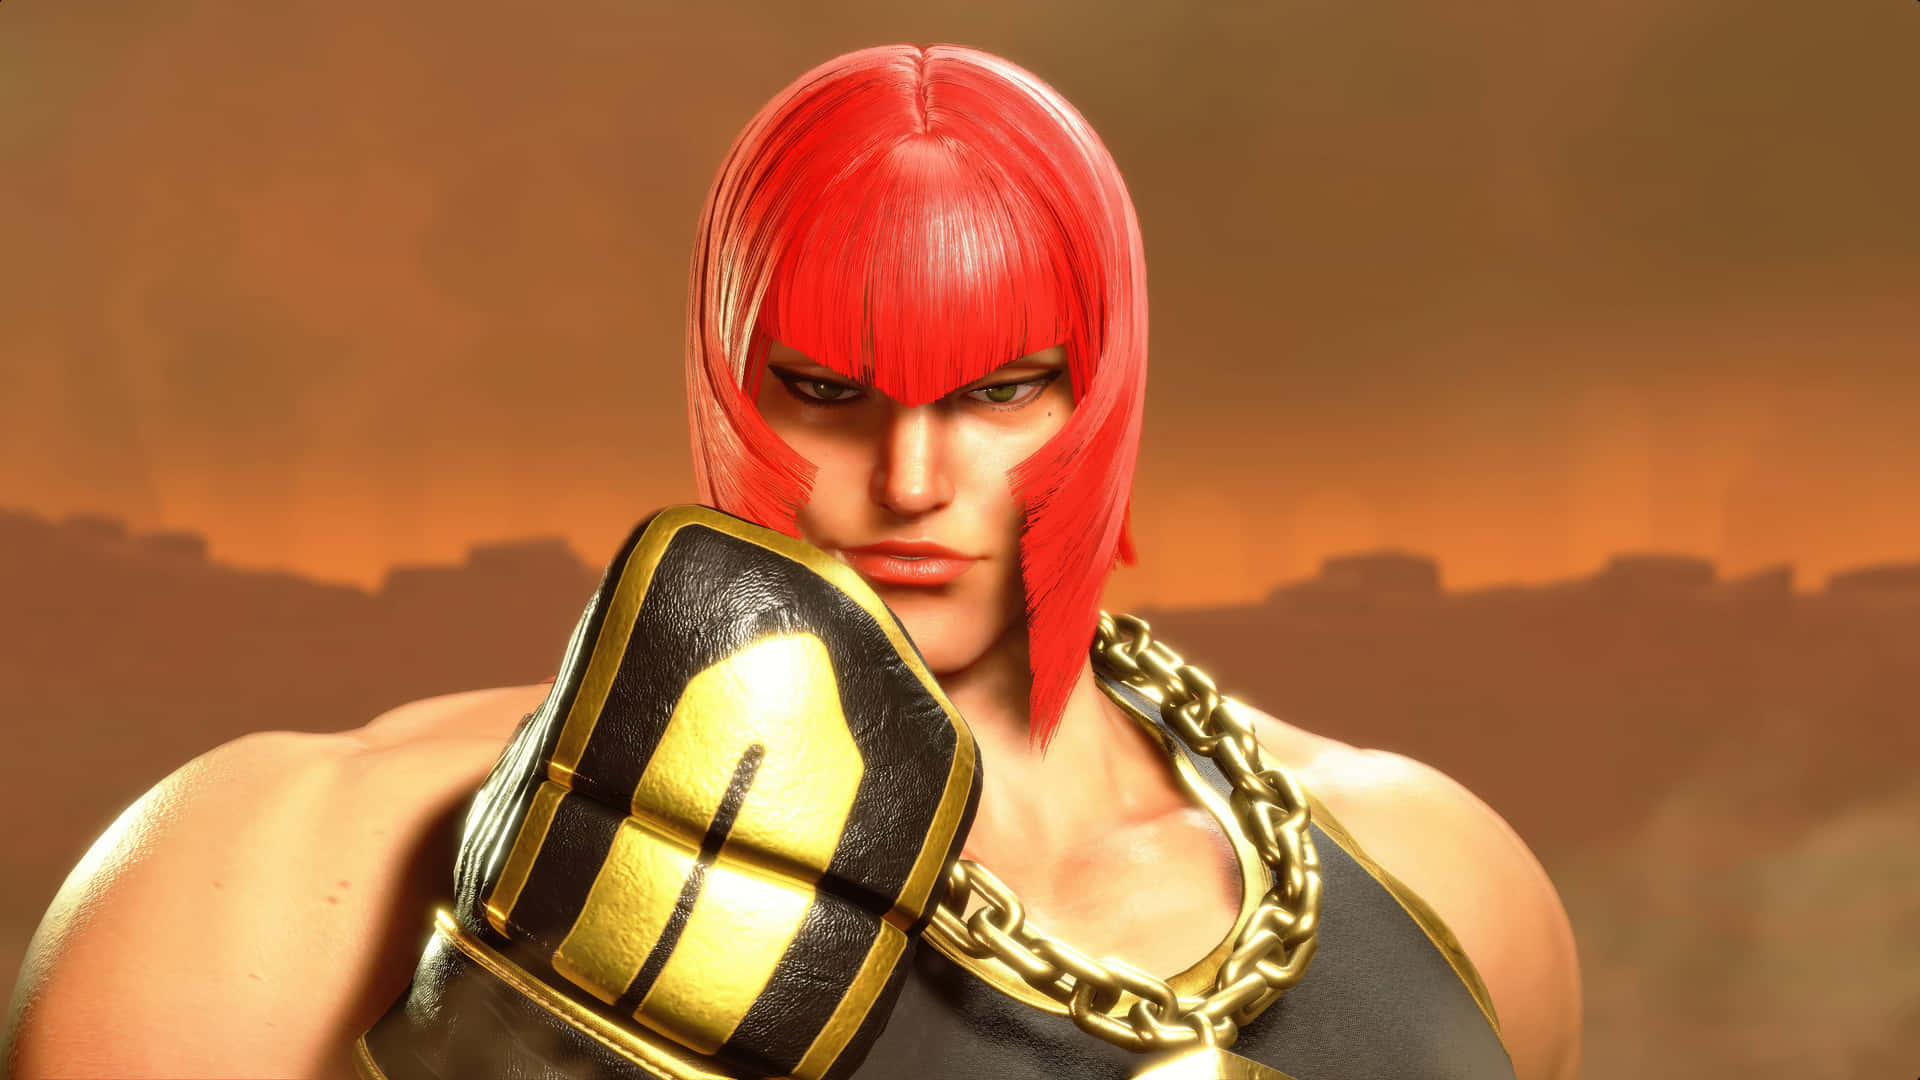 Street Fighter6 Red Haired Fighter Wallpaper